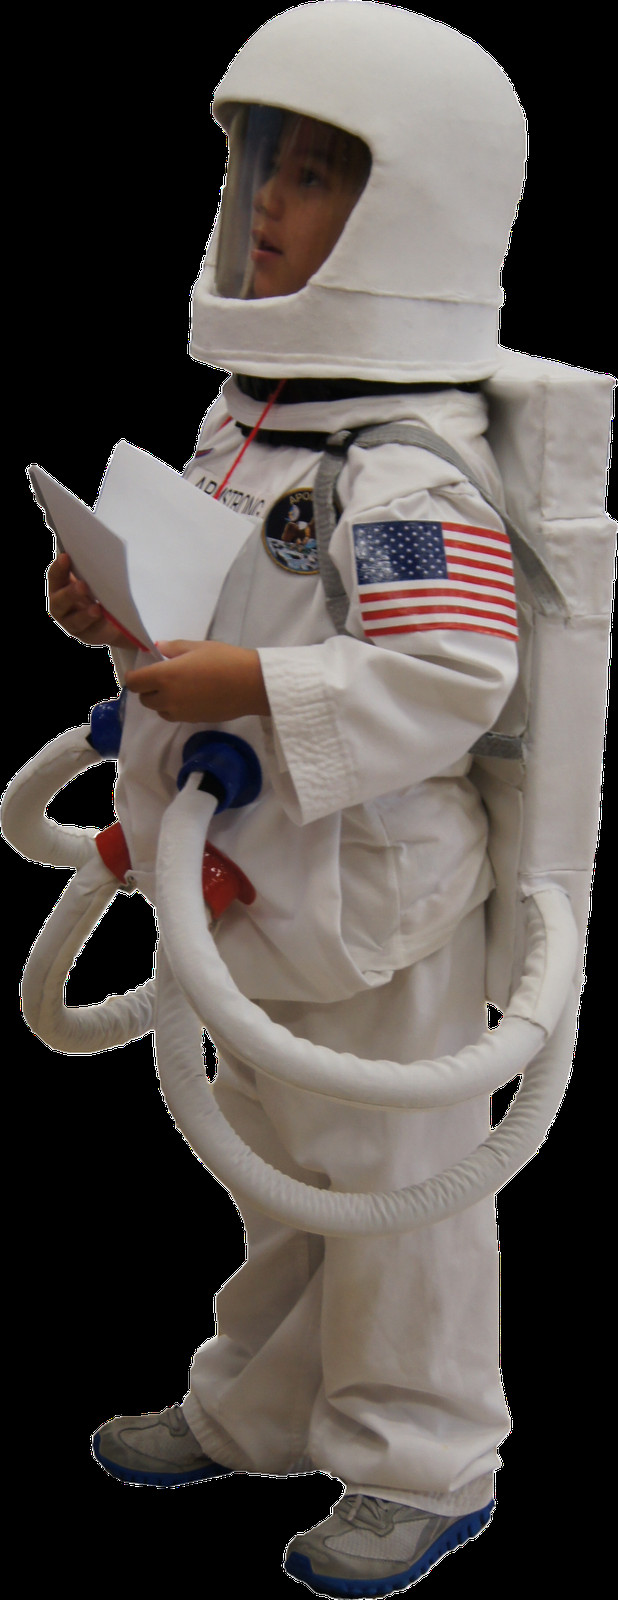 Best ideas about Astronaut Costume DIY
. Save or Pin ivetastic DIY armstrong astronaut suit Now.